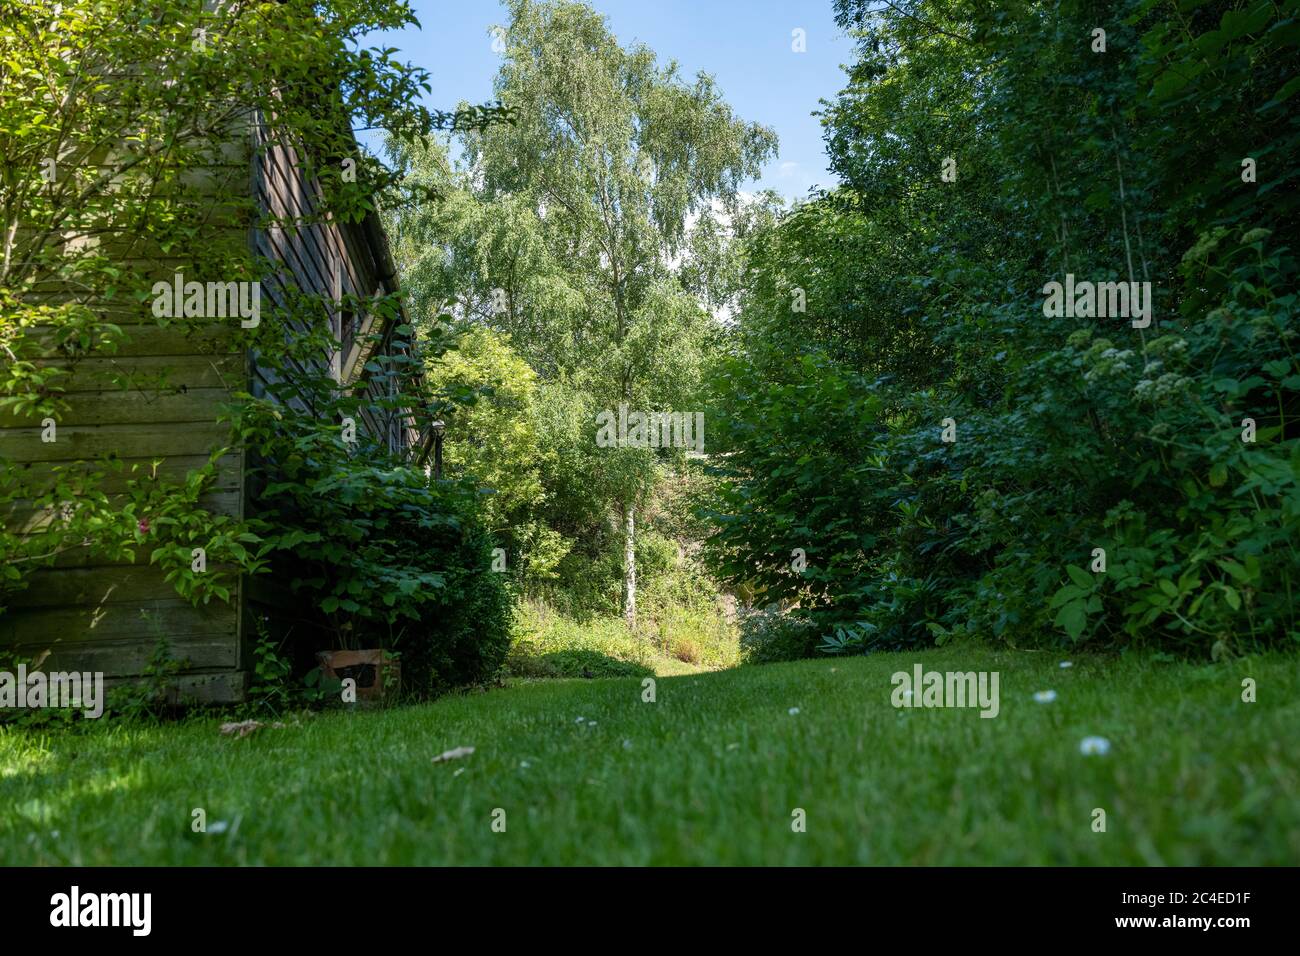 Low level shot looking across a lawn towards a distant tree in an English garden. Stock Photo